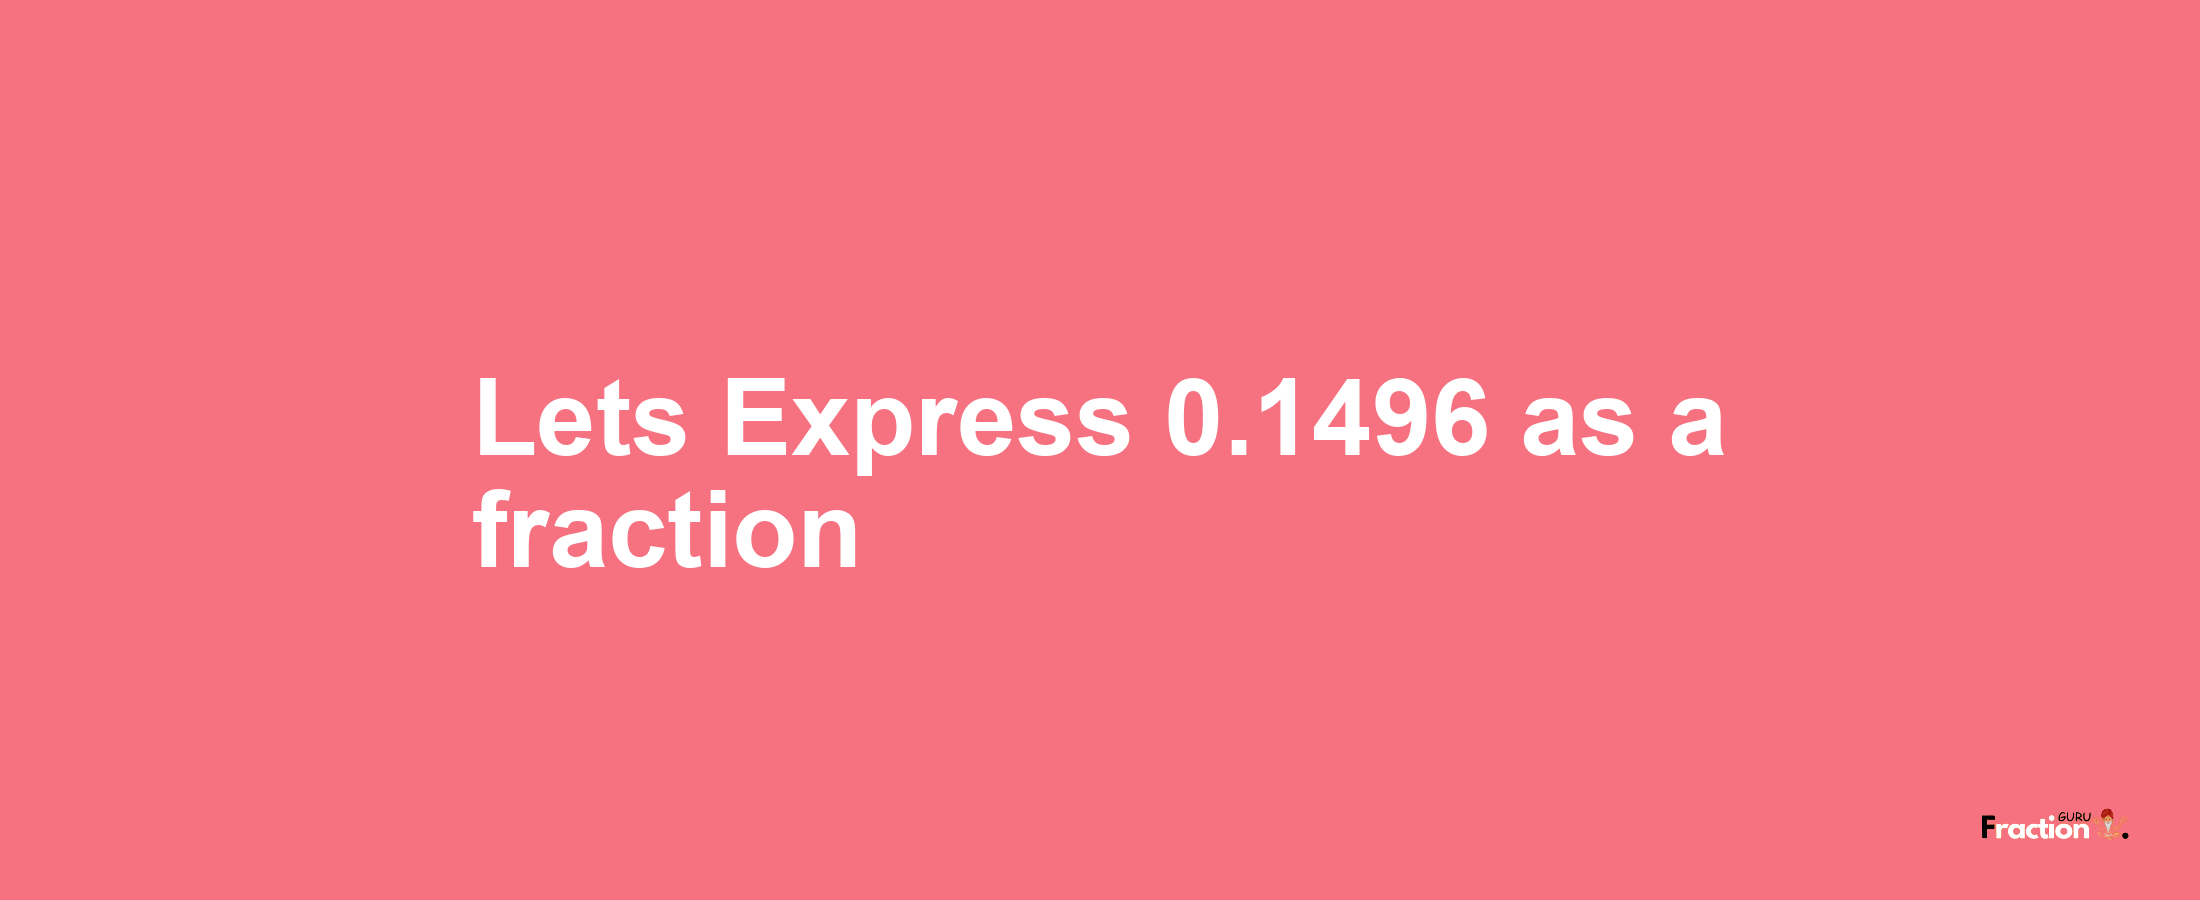 Lets Express 0.1496 as afraction